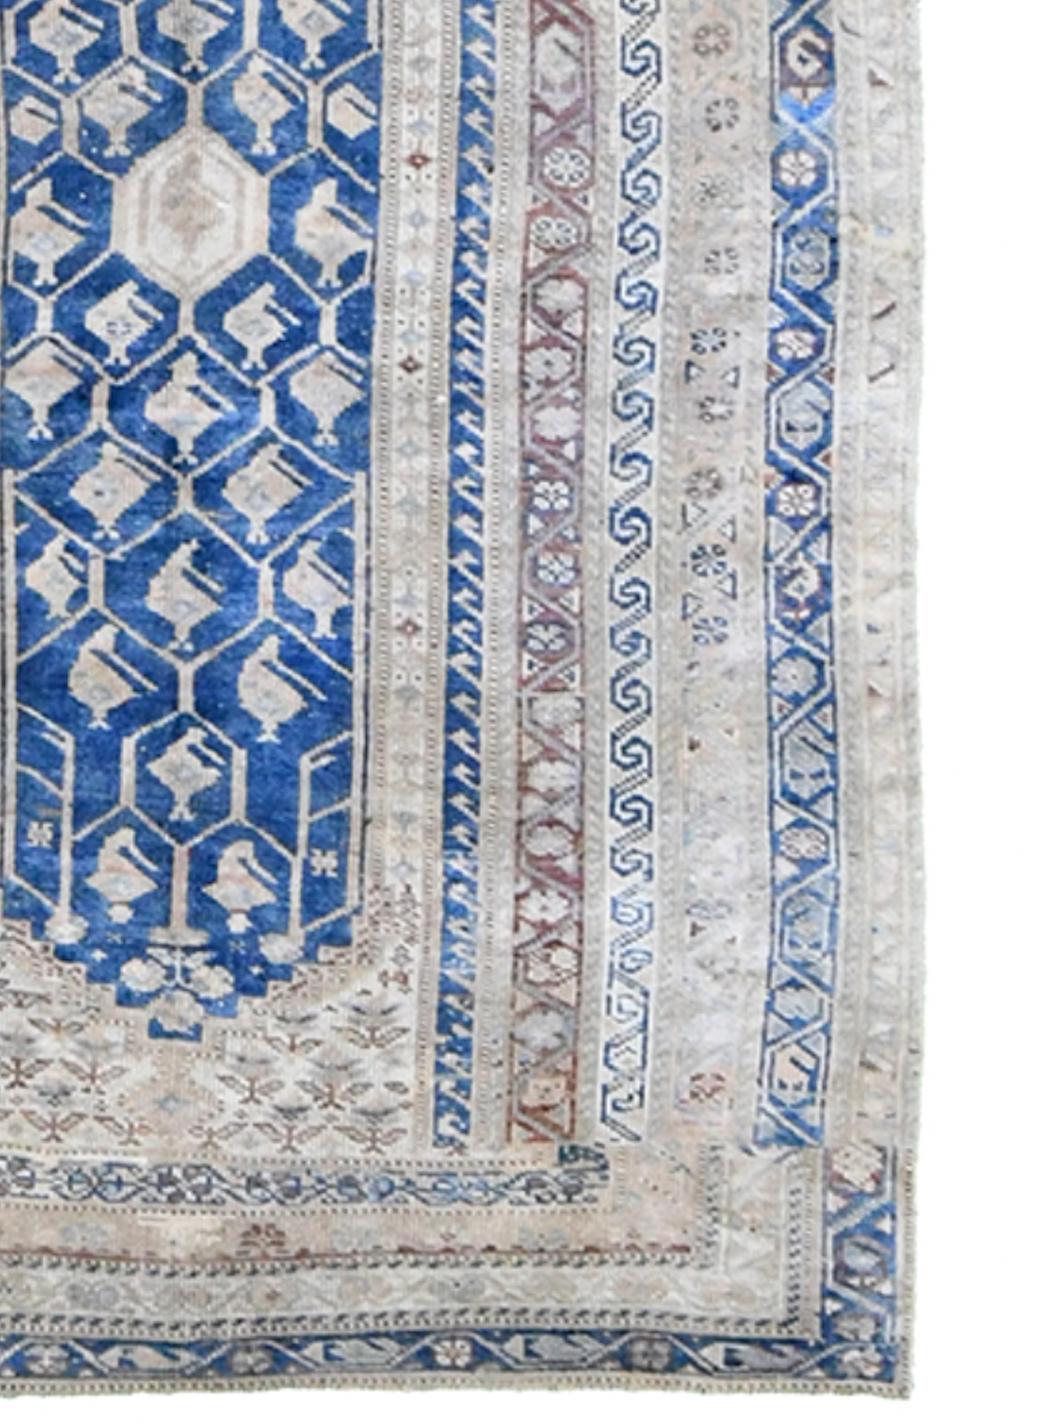 Origin: Persia
Dimensions: 6’6 x 4’1
Age: 1920’s
Design: Malayer
Material: 100% Wool-pile
Color: Blue, Taupe, Beige, Light Grey

17095

Persian rugs and carpets of various types were woven in parallel by nomadic tribes in village and town